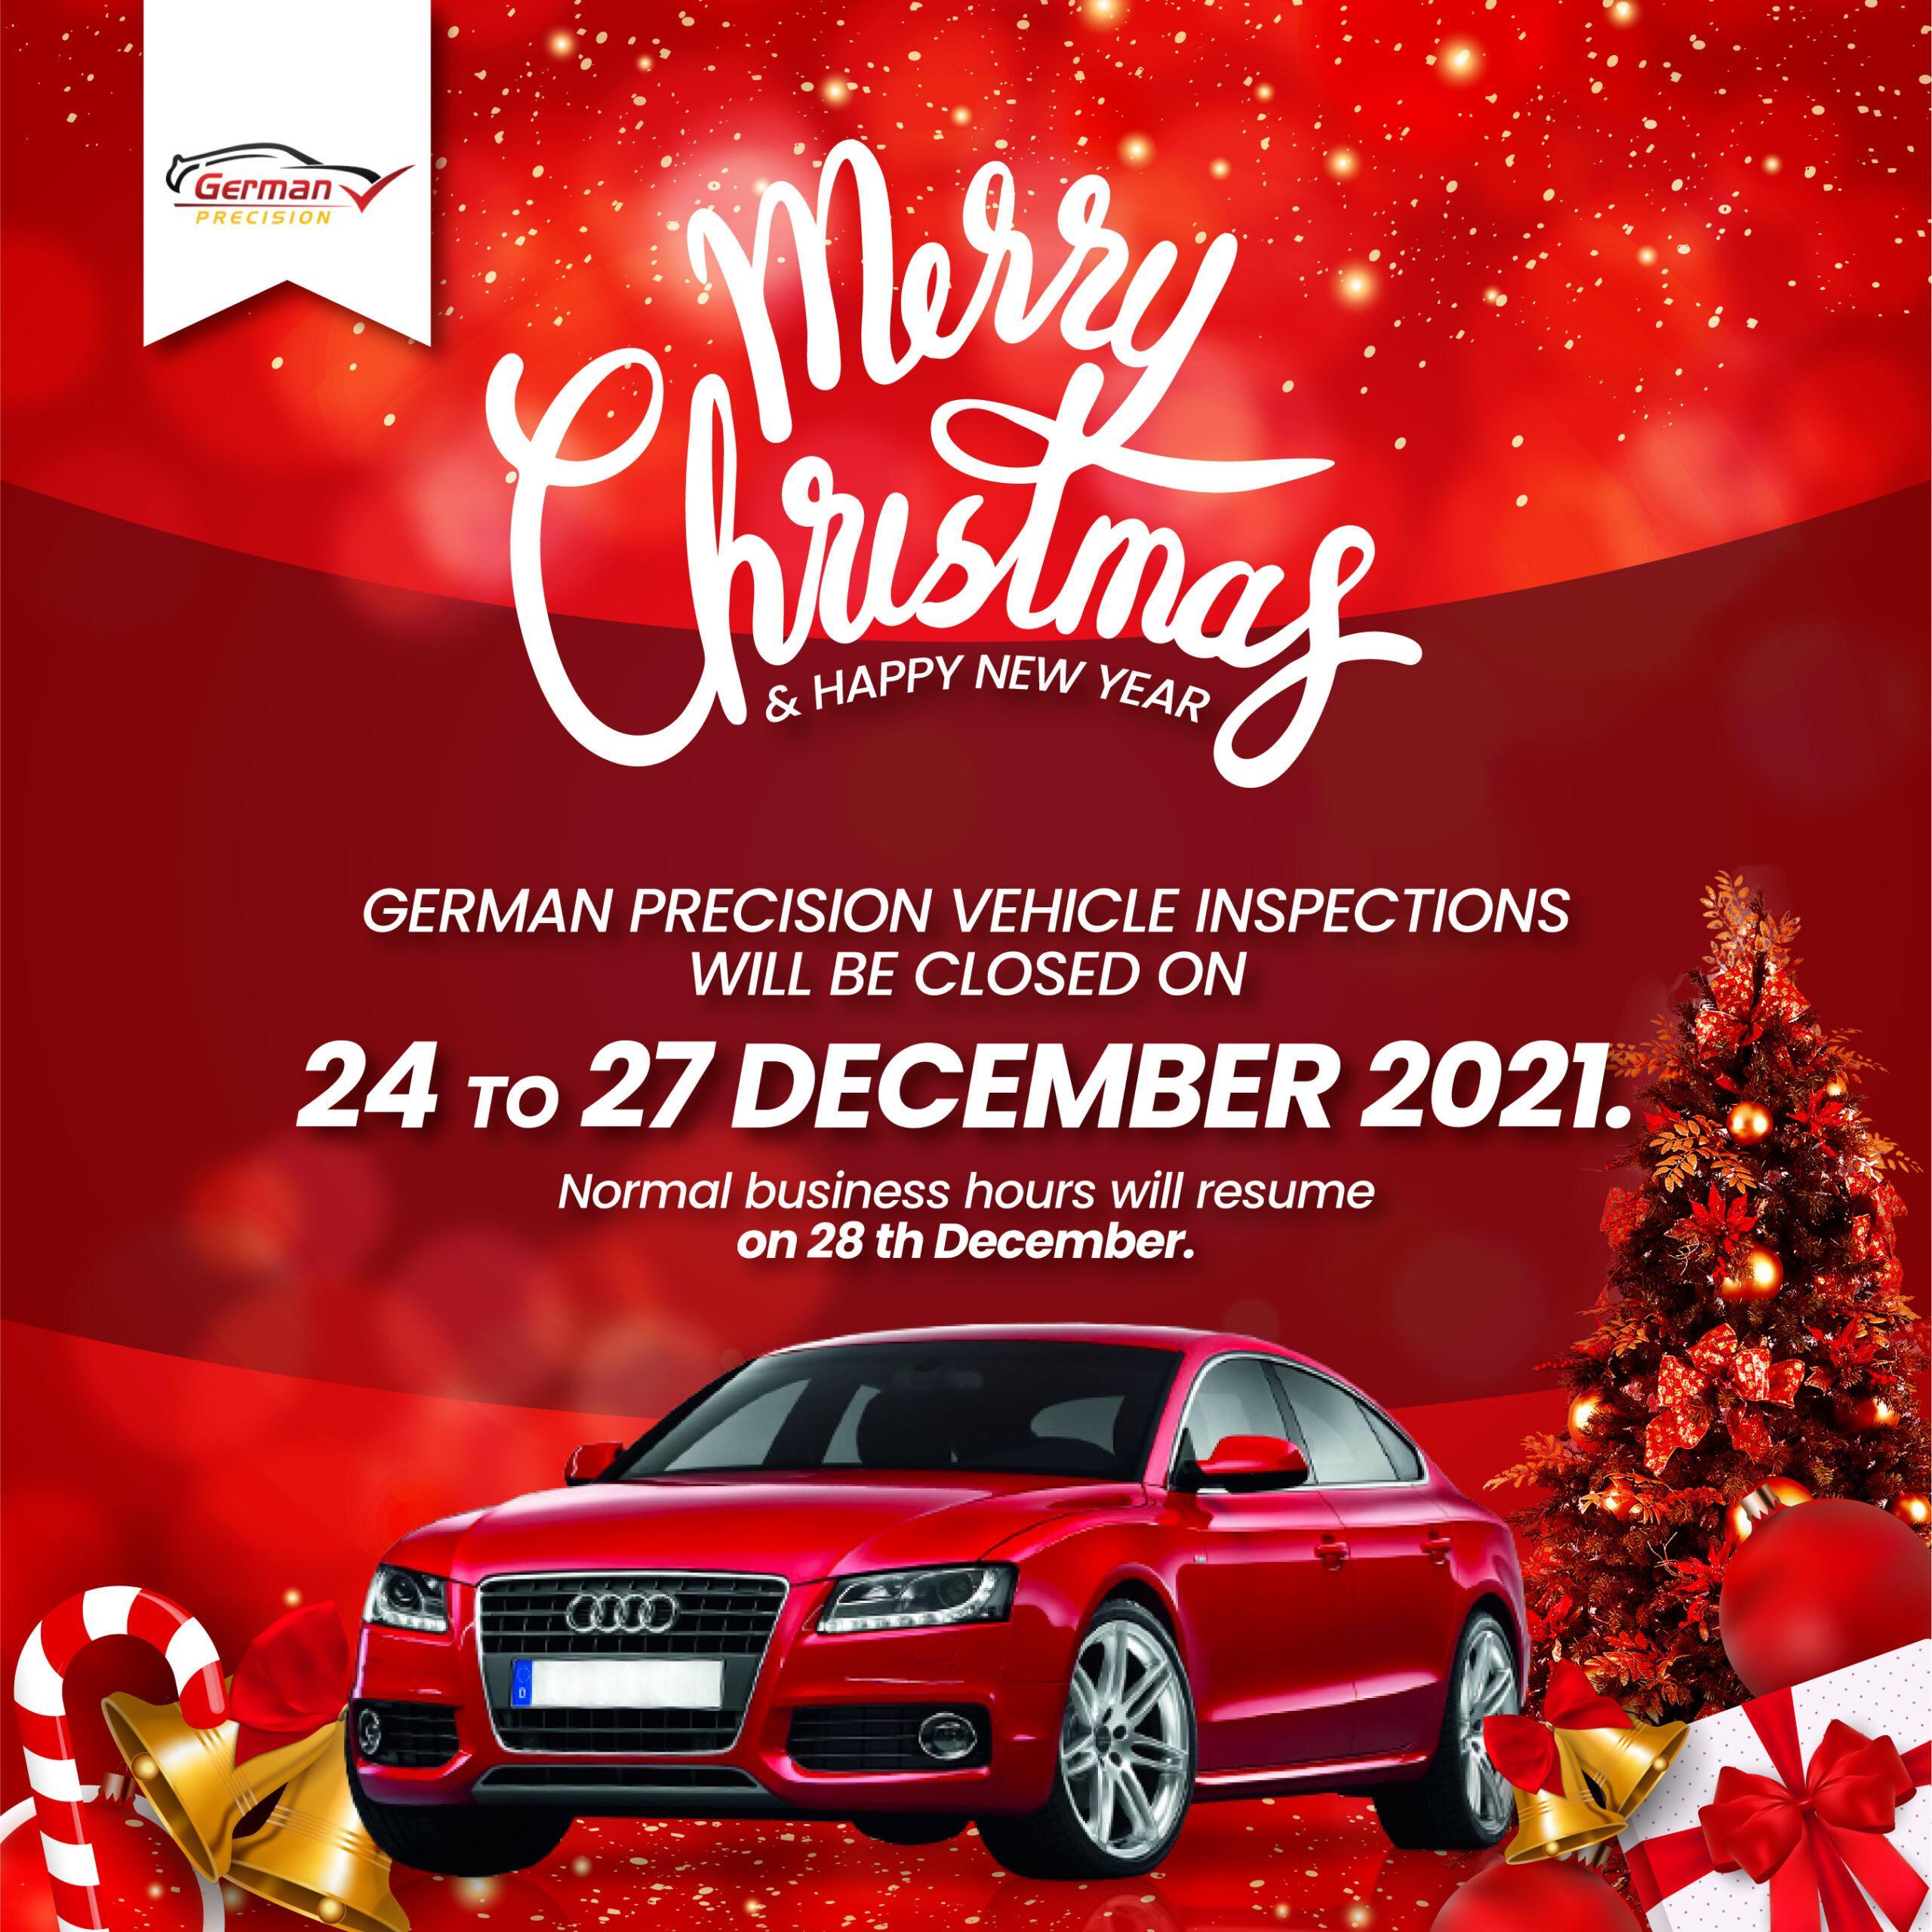 Merry Christmas and Happy New Year from German Precision!